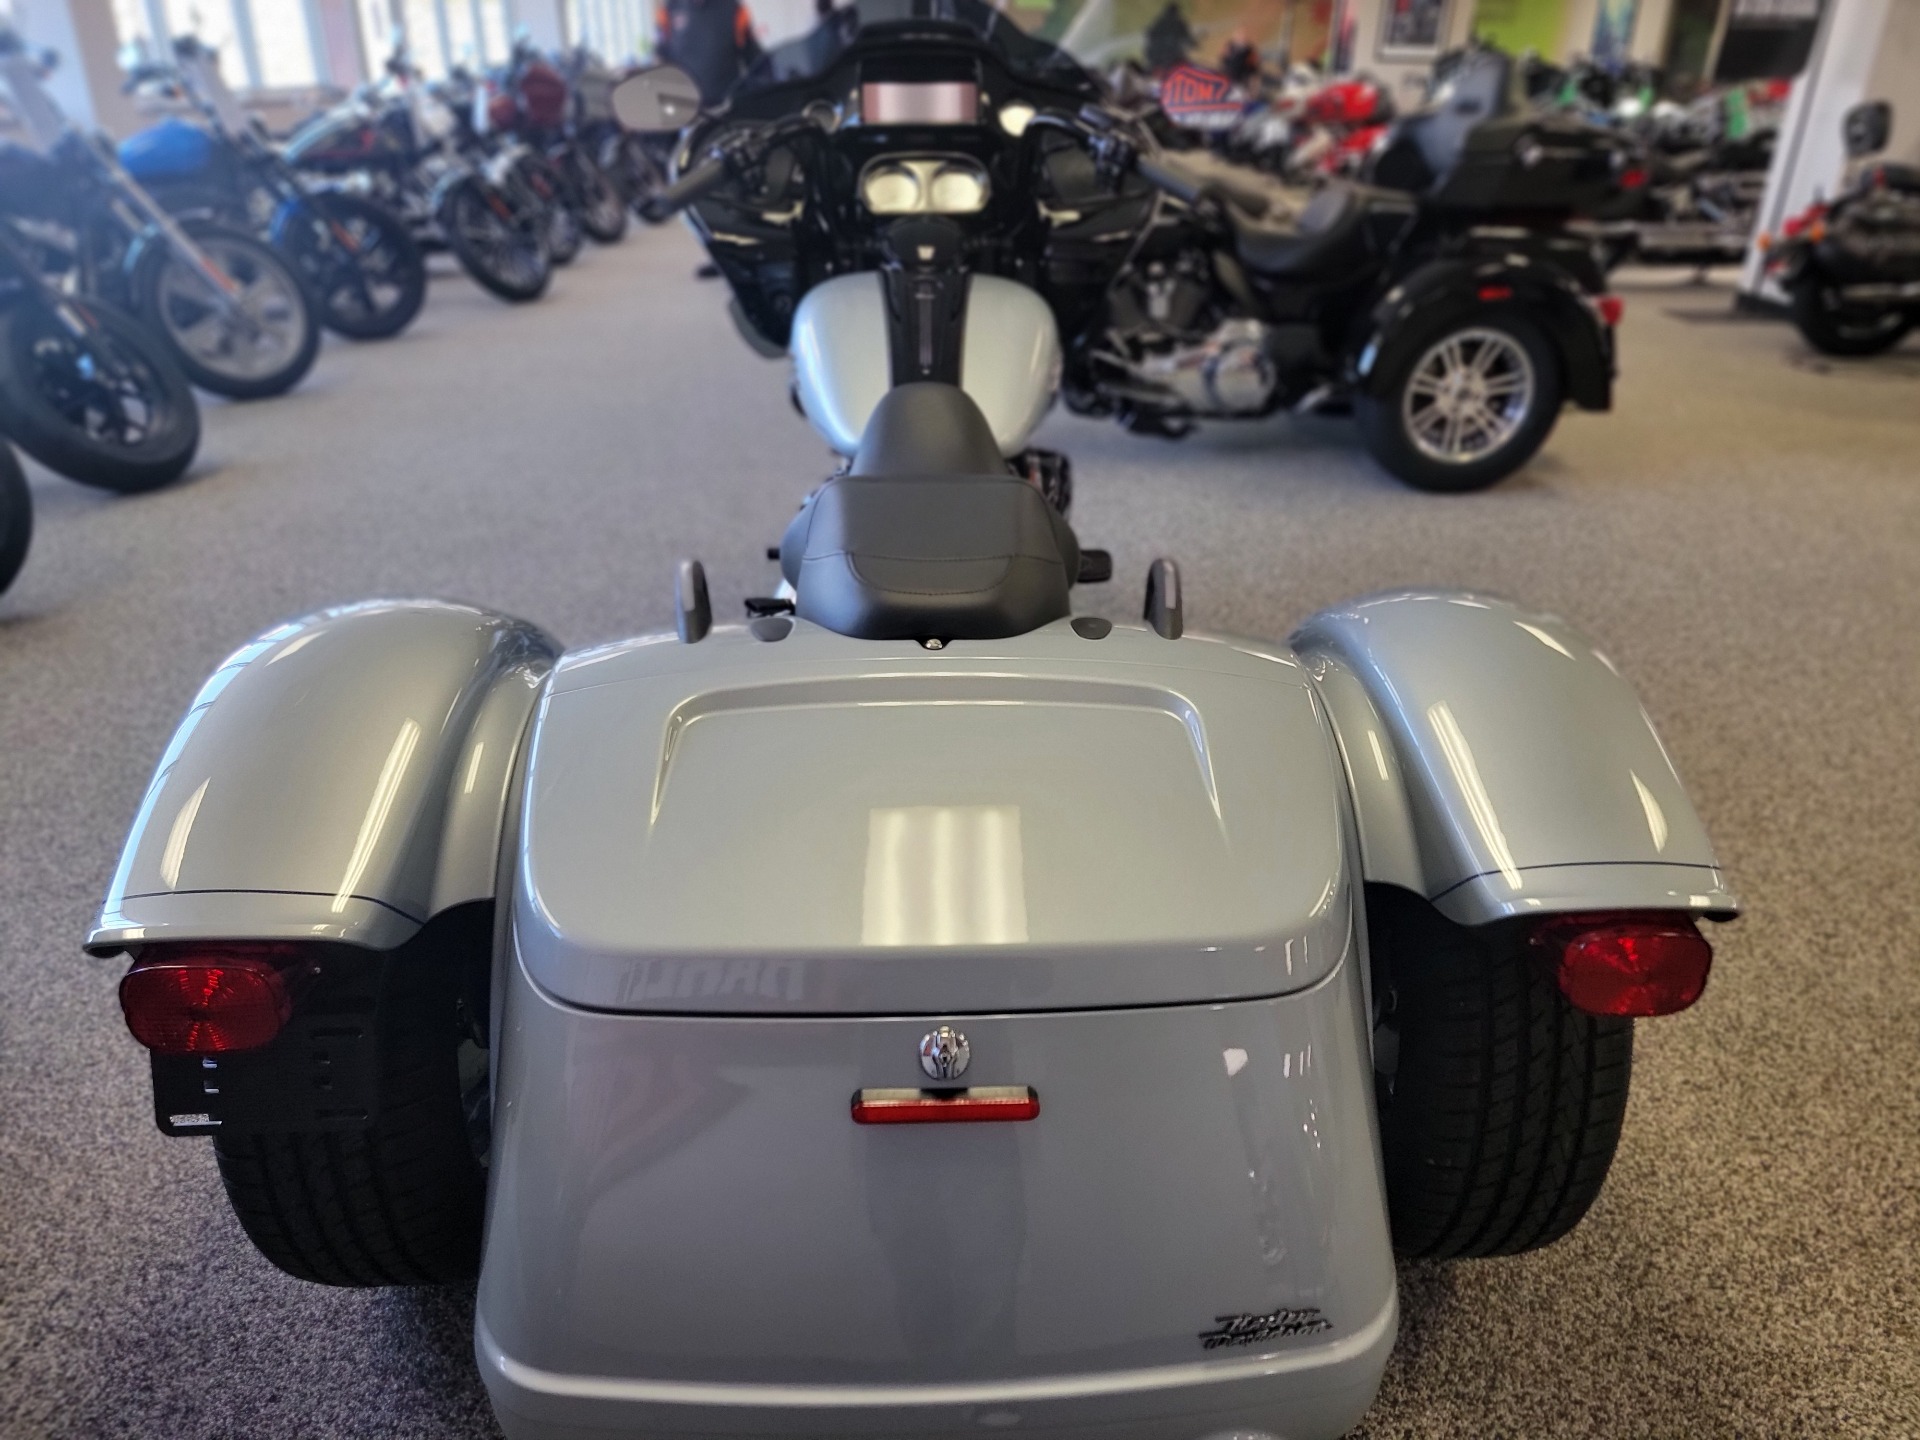 2024 Harley-Davidson Road Glide® 3 in Knoxville, Tennessee - Photo 5